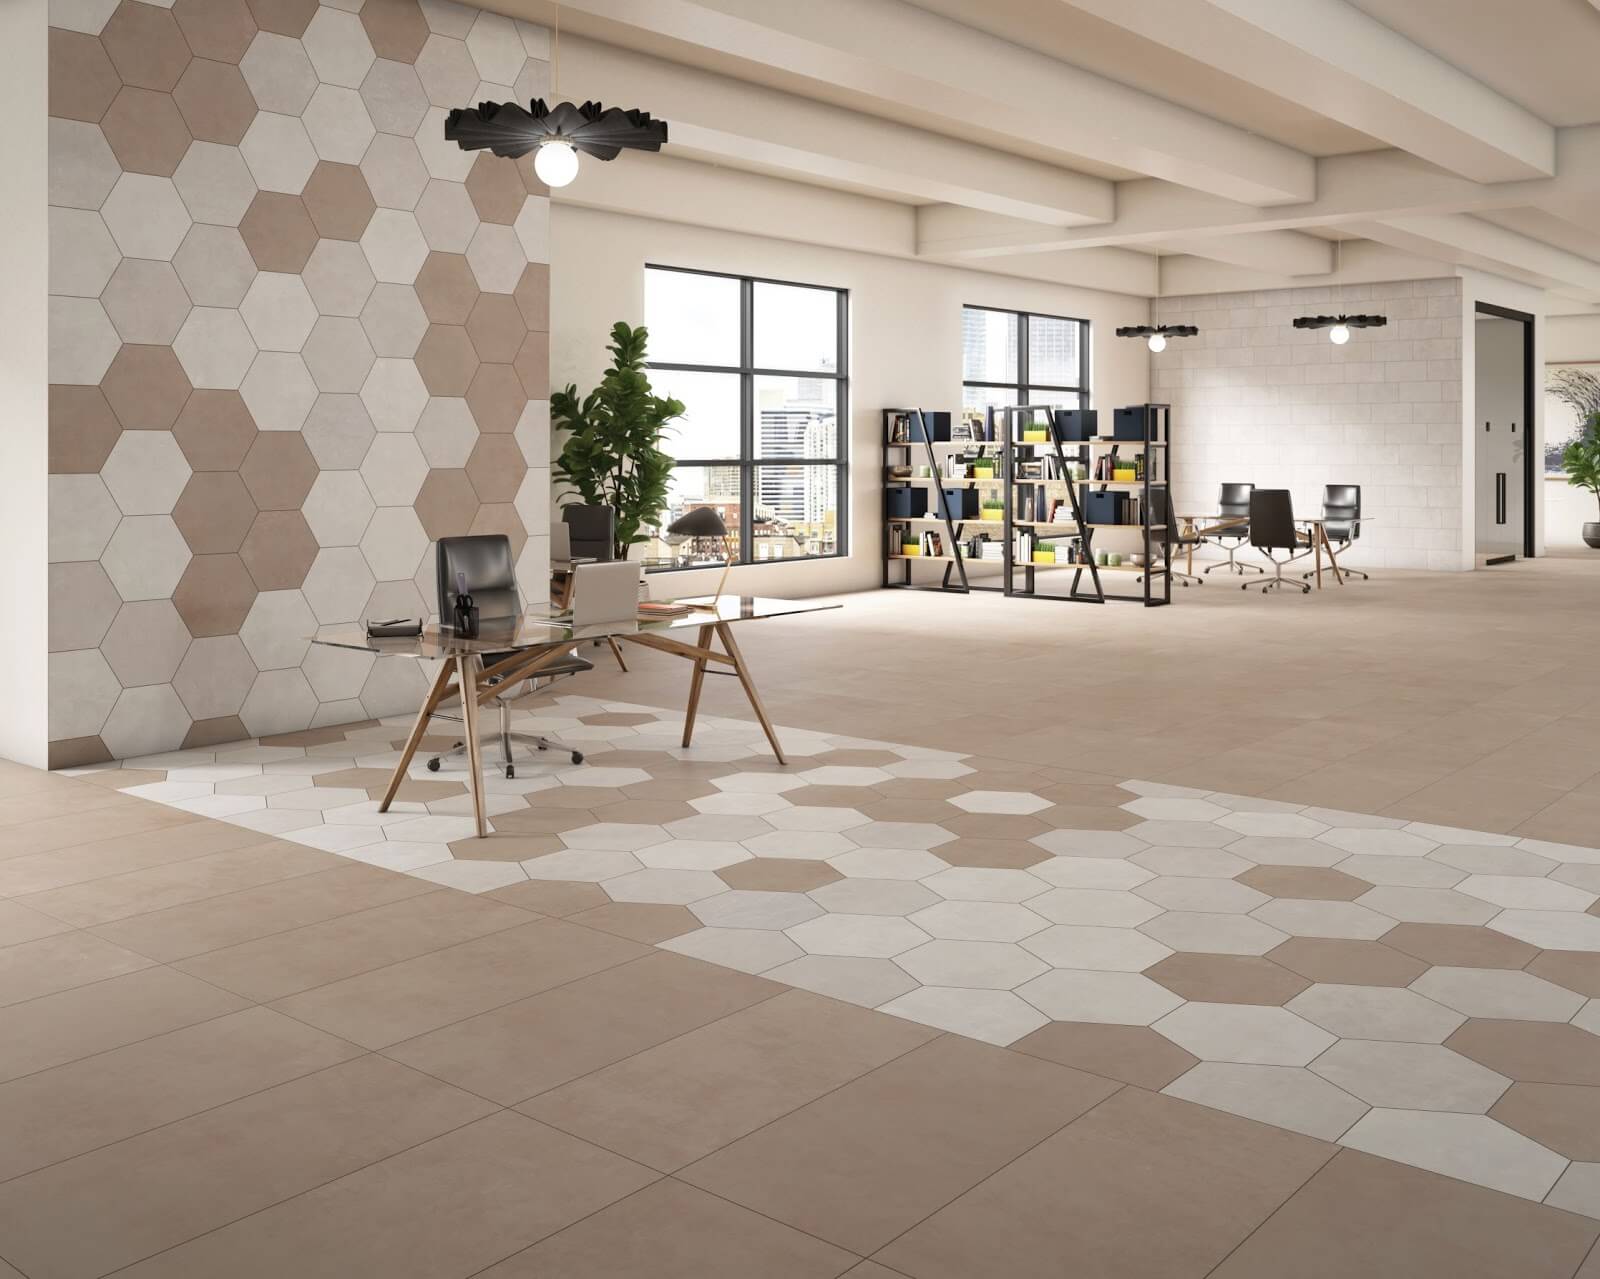 Large hex tiles in cream and beige